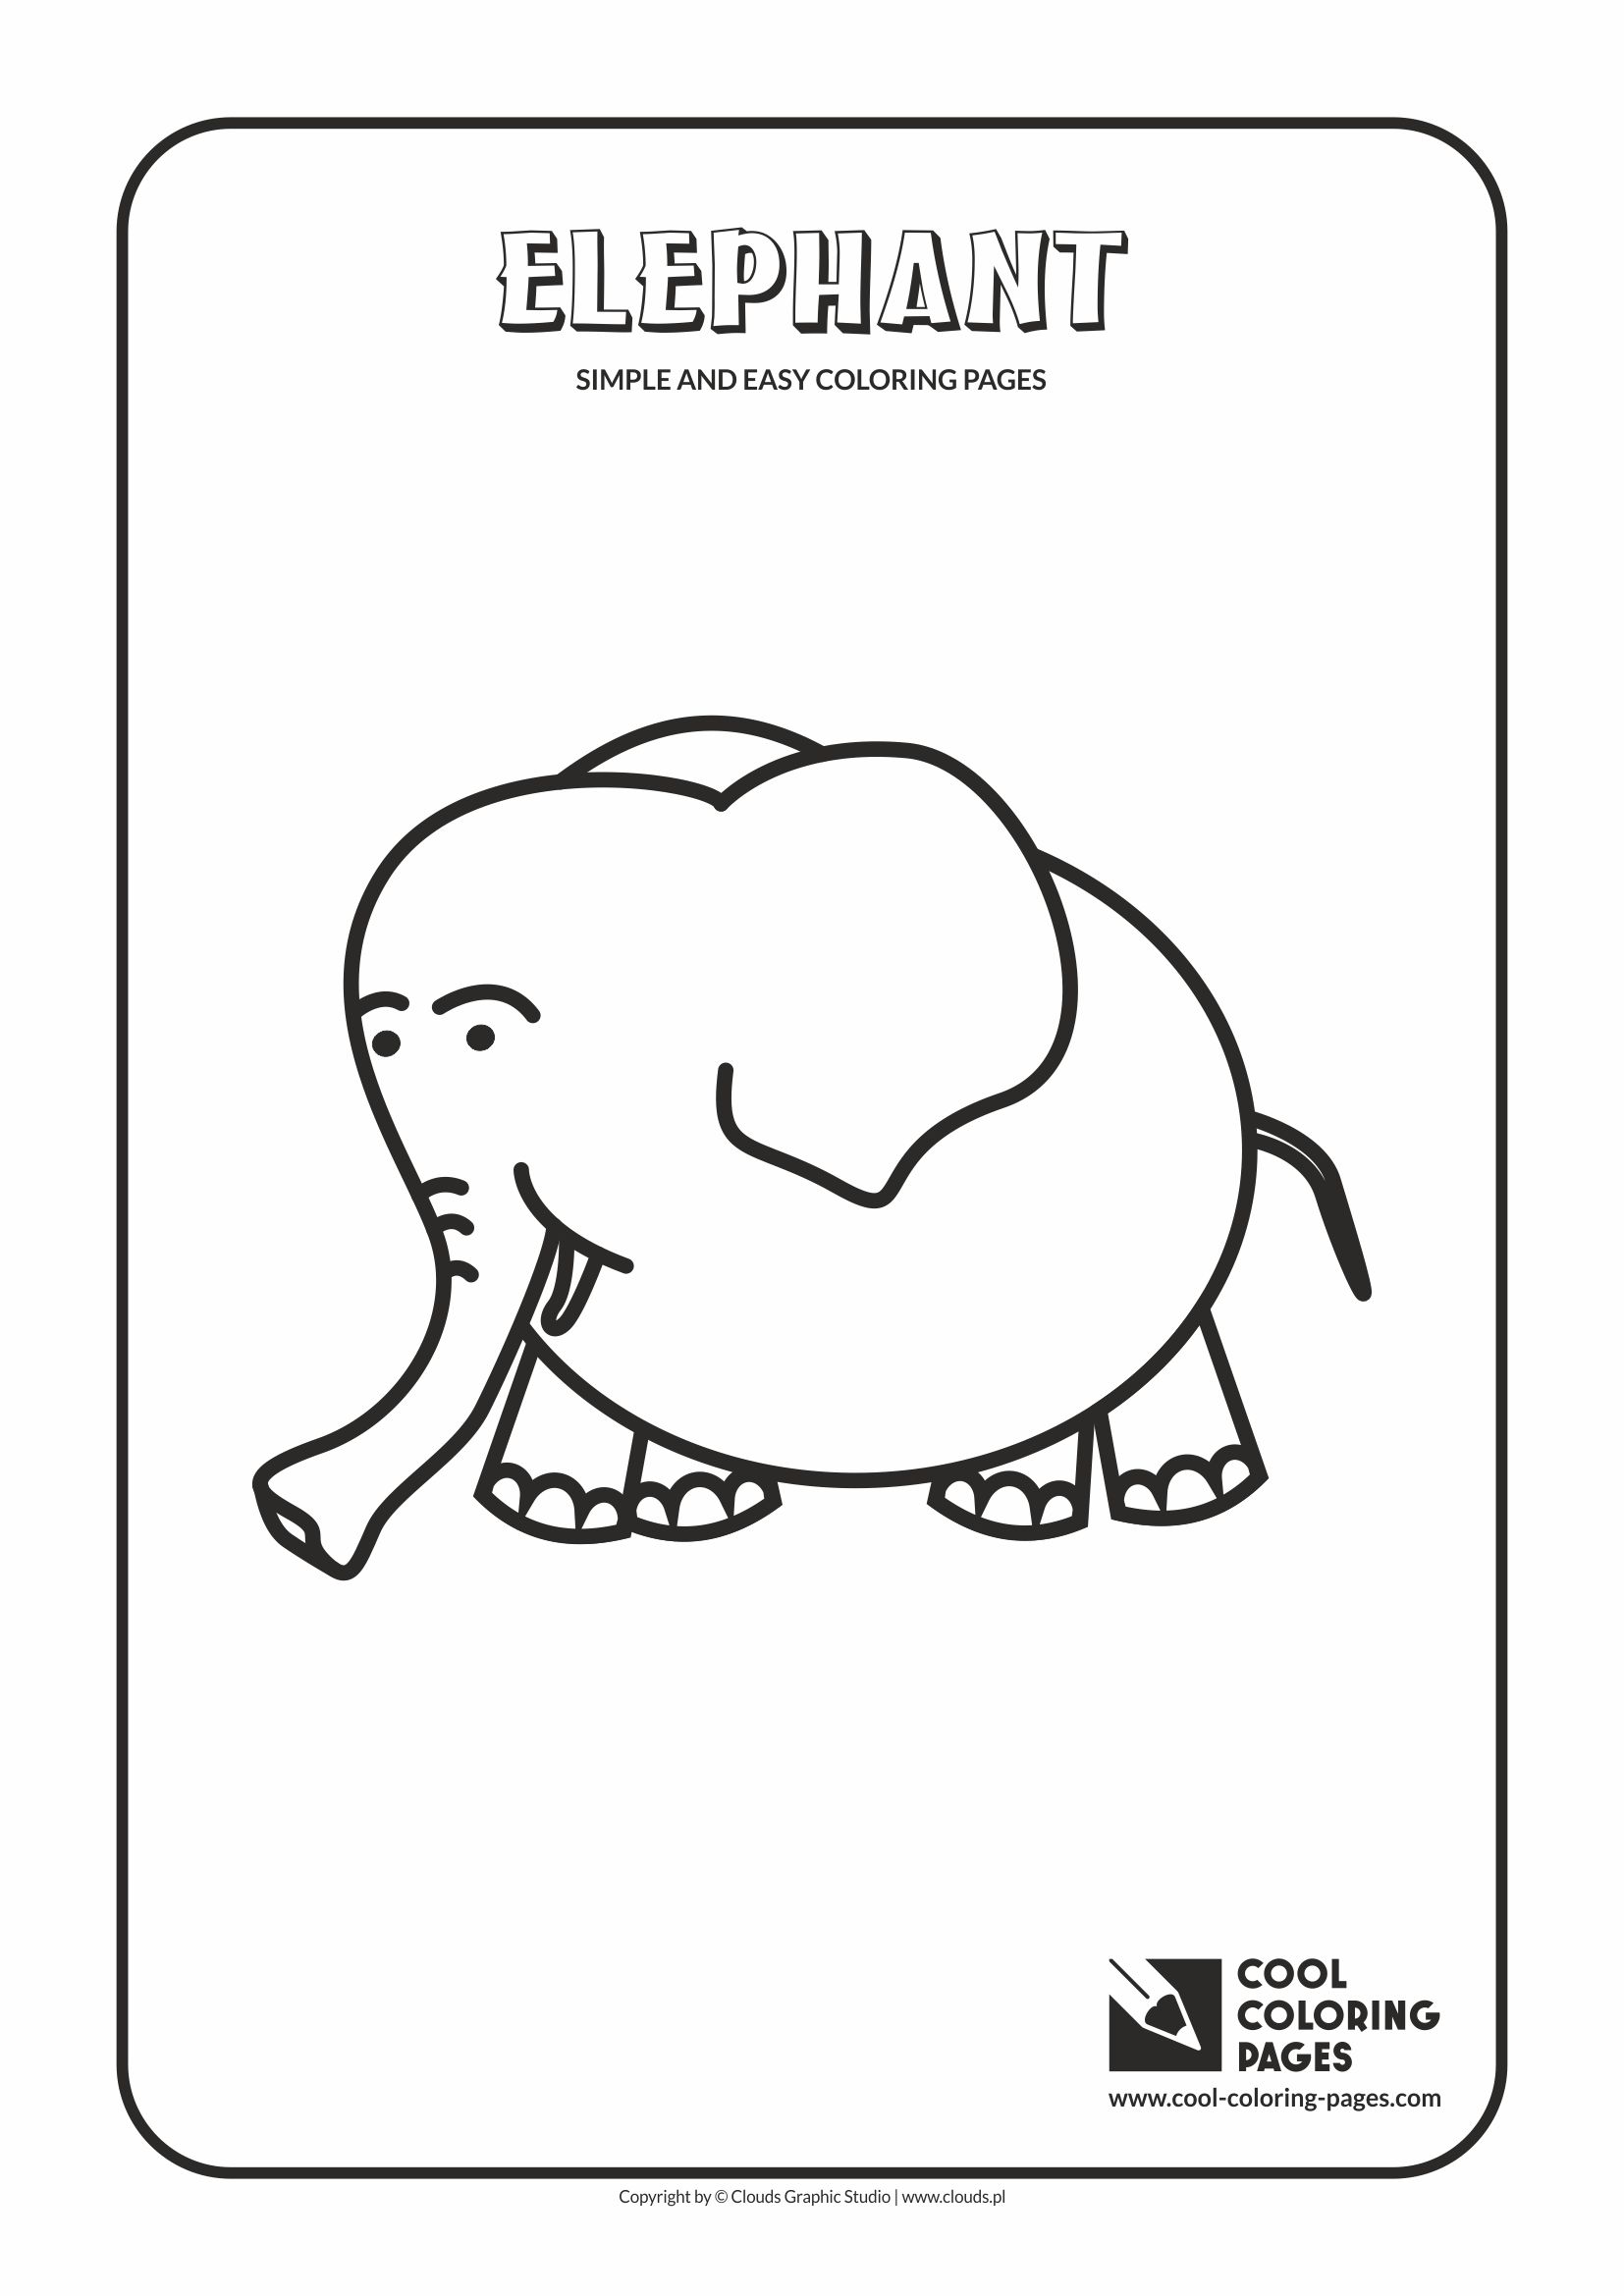 Simple and easy coloring pages for toddlers - Elephant